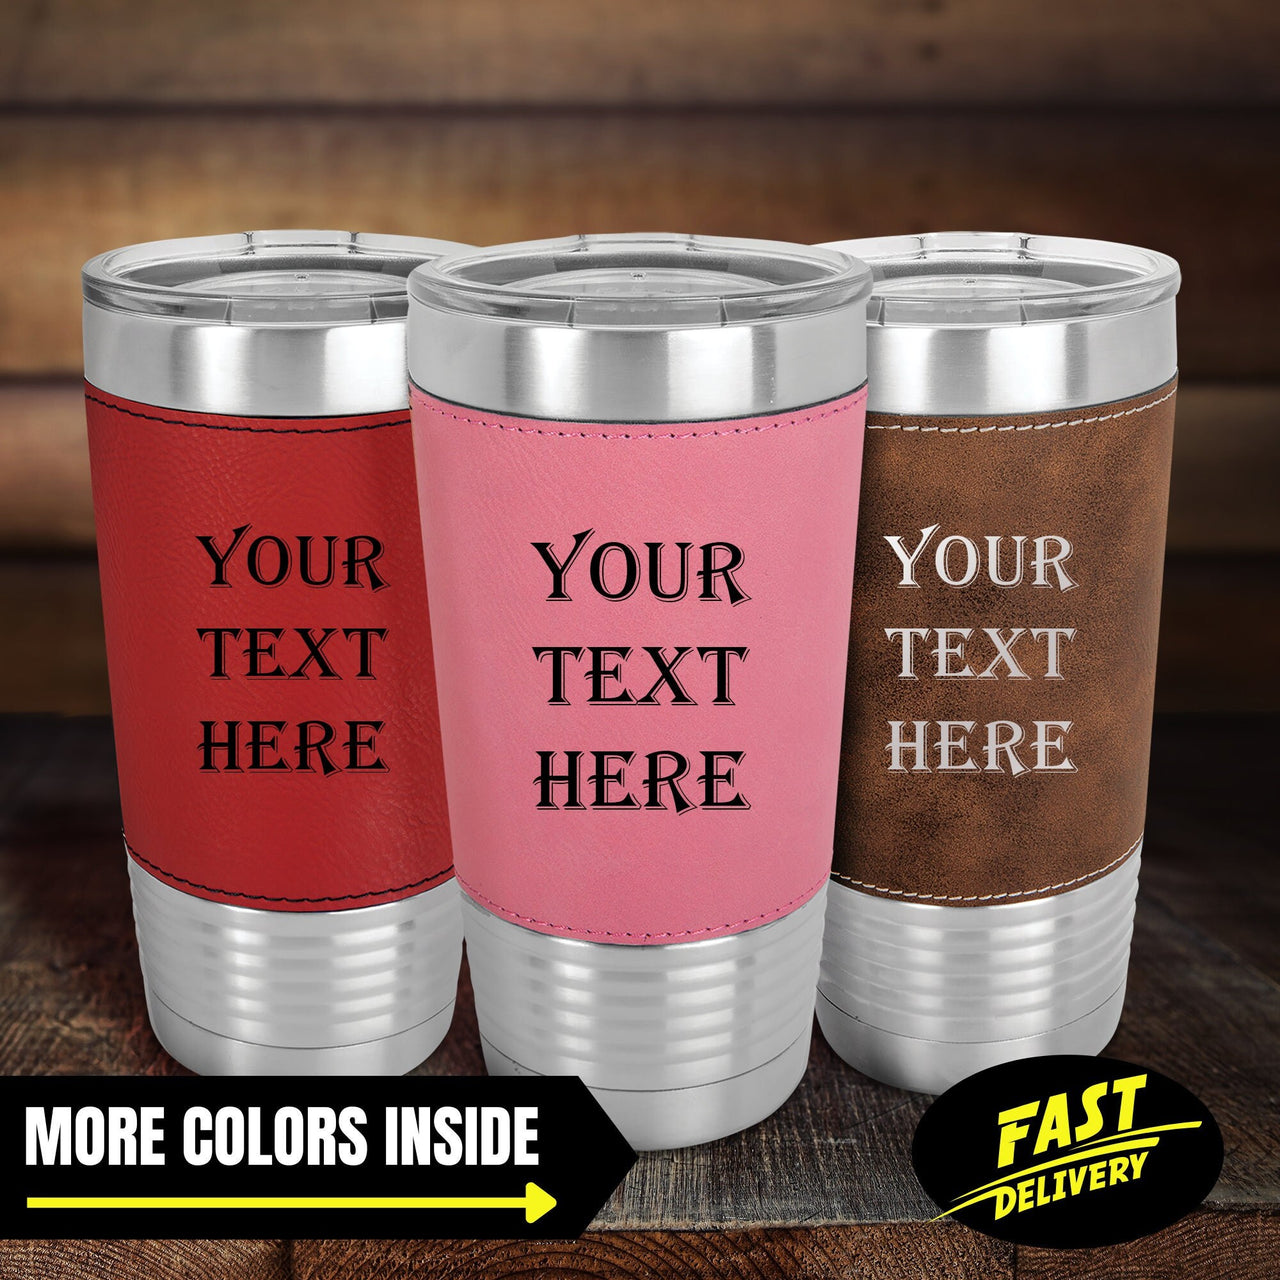 Premium Quality Personalized Your Text 20 oz Leather Tumbler | Custom Insulated Tumbler